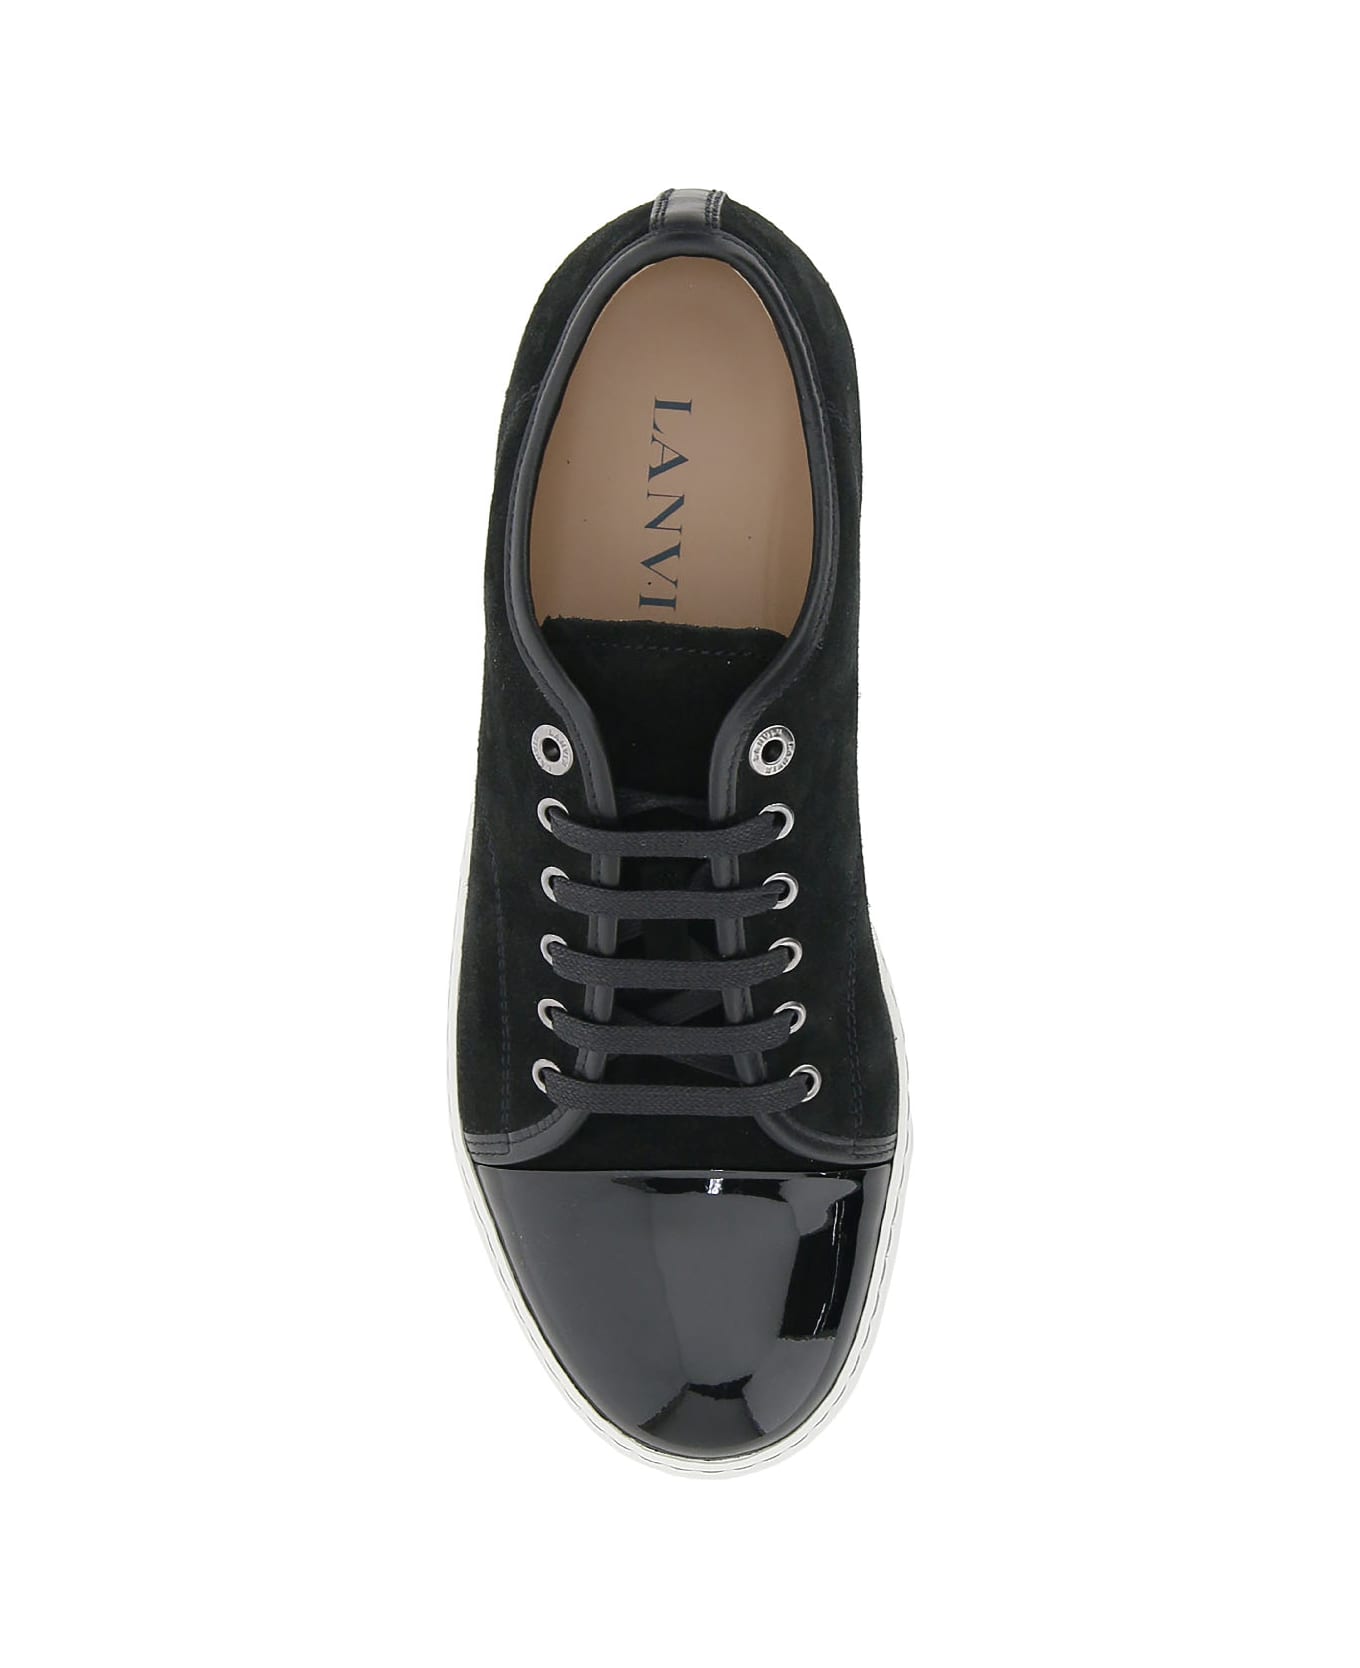 Lanvin Dbb1 Sneakers In Black Suede And Leather - BLACK (Black) スニーカー